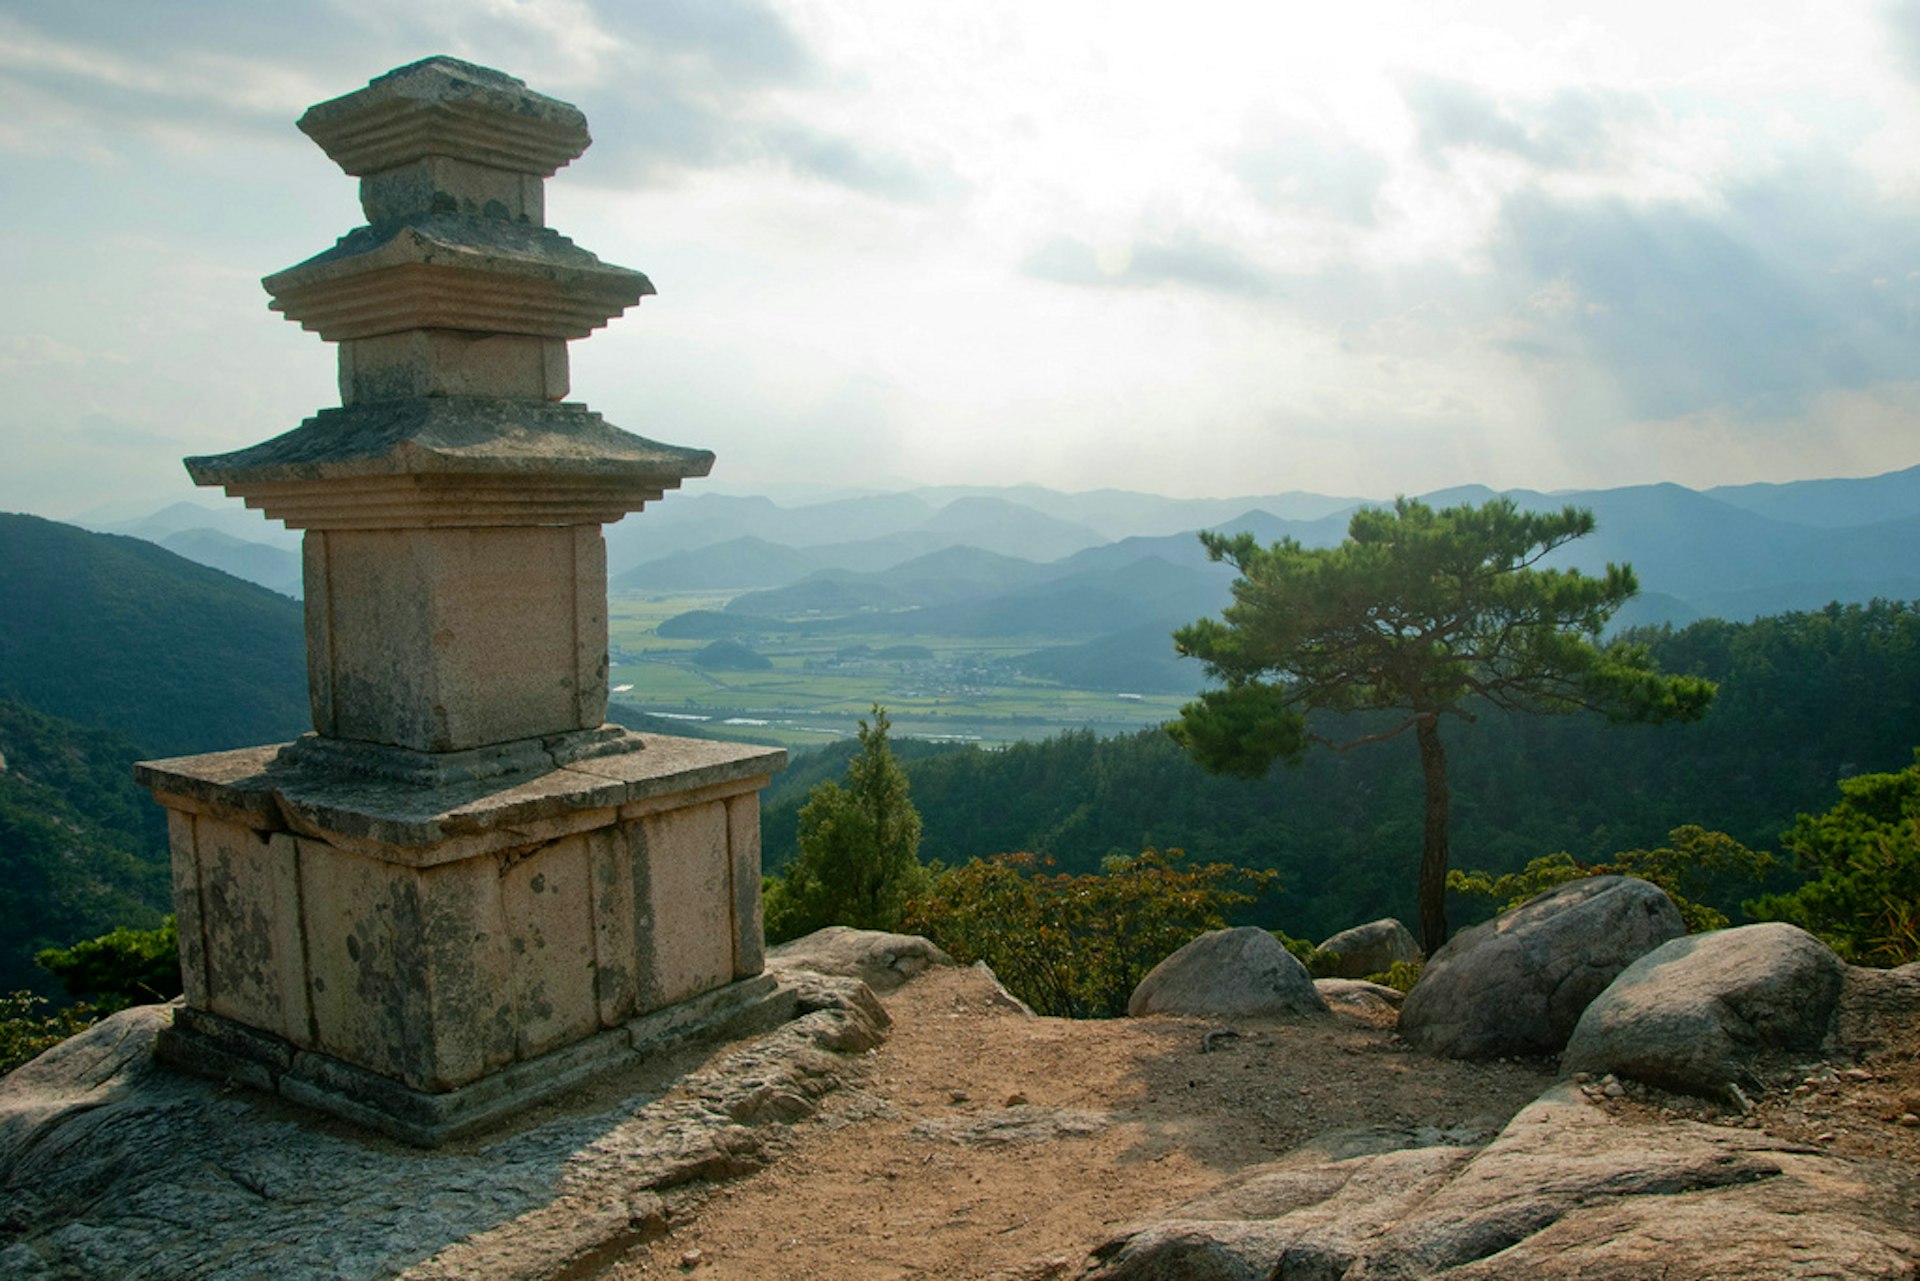 Mystical views to find during a hike on Namsan Mountain. Image by theaucitron / CC BY-SA 2.0